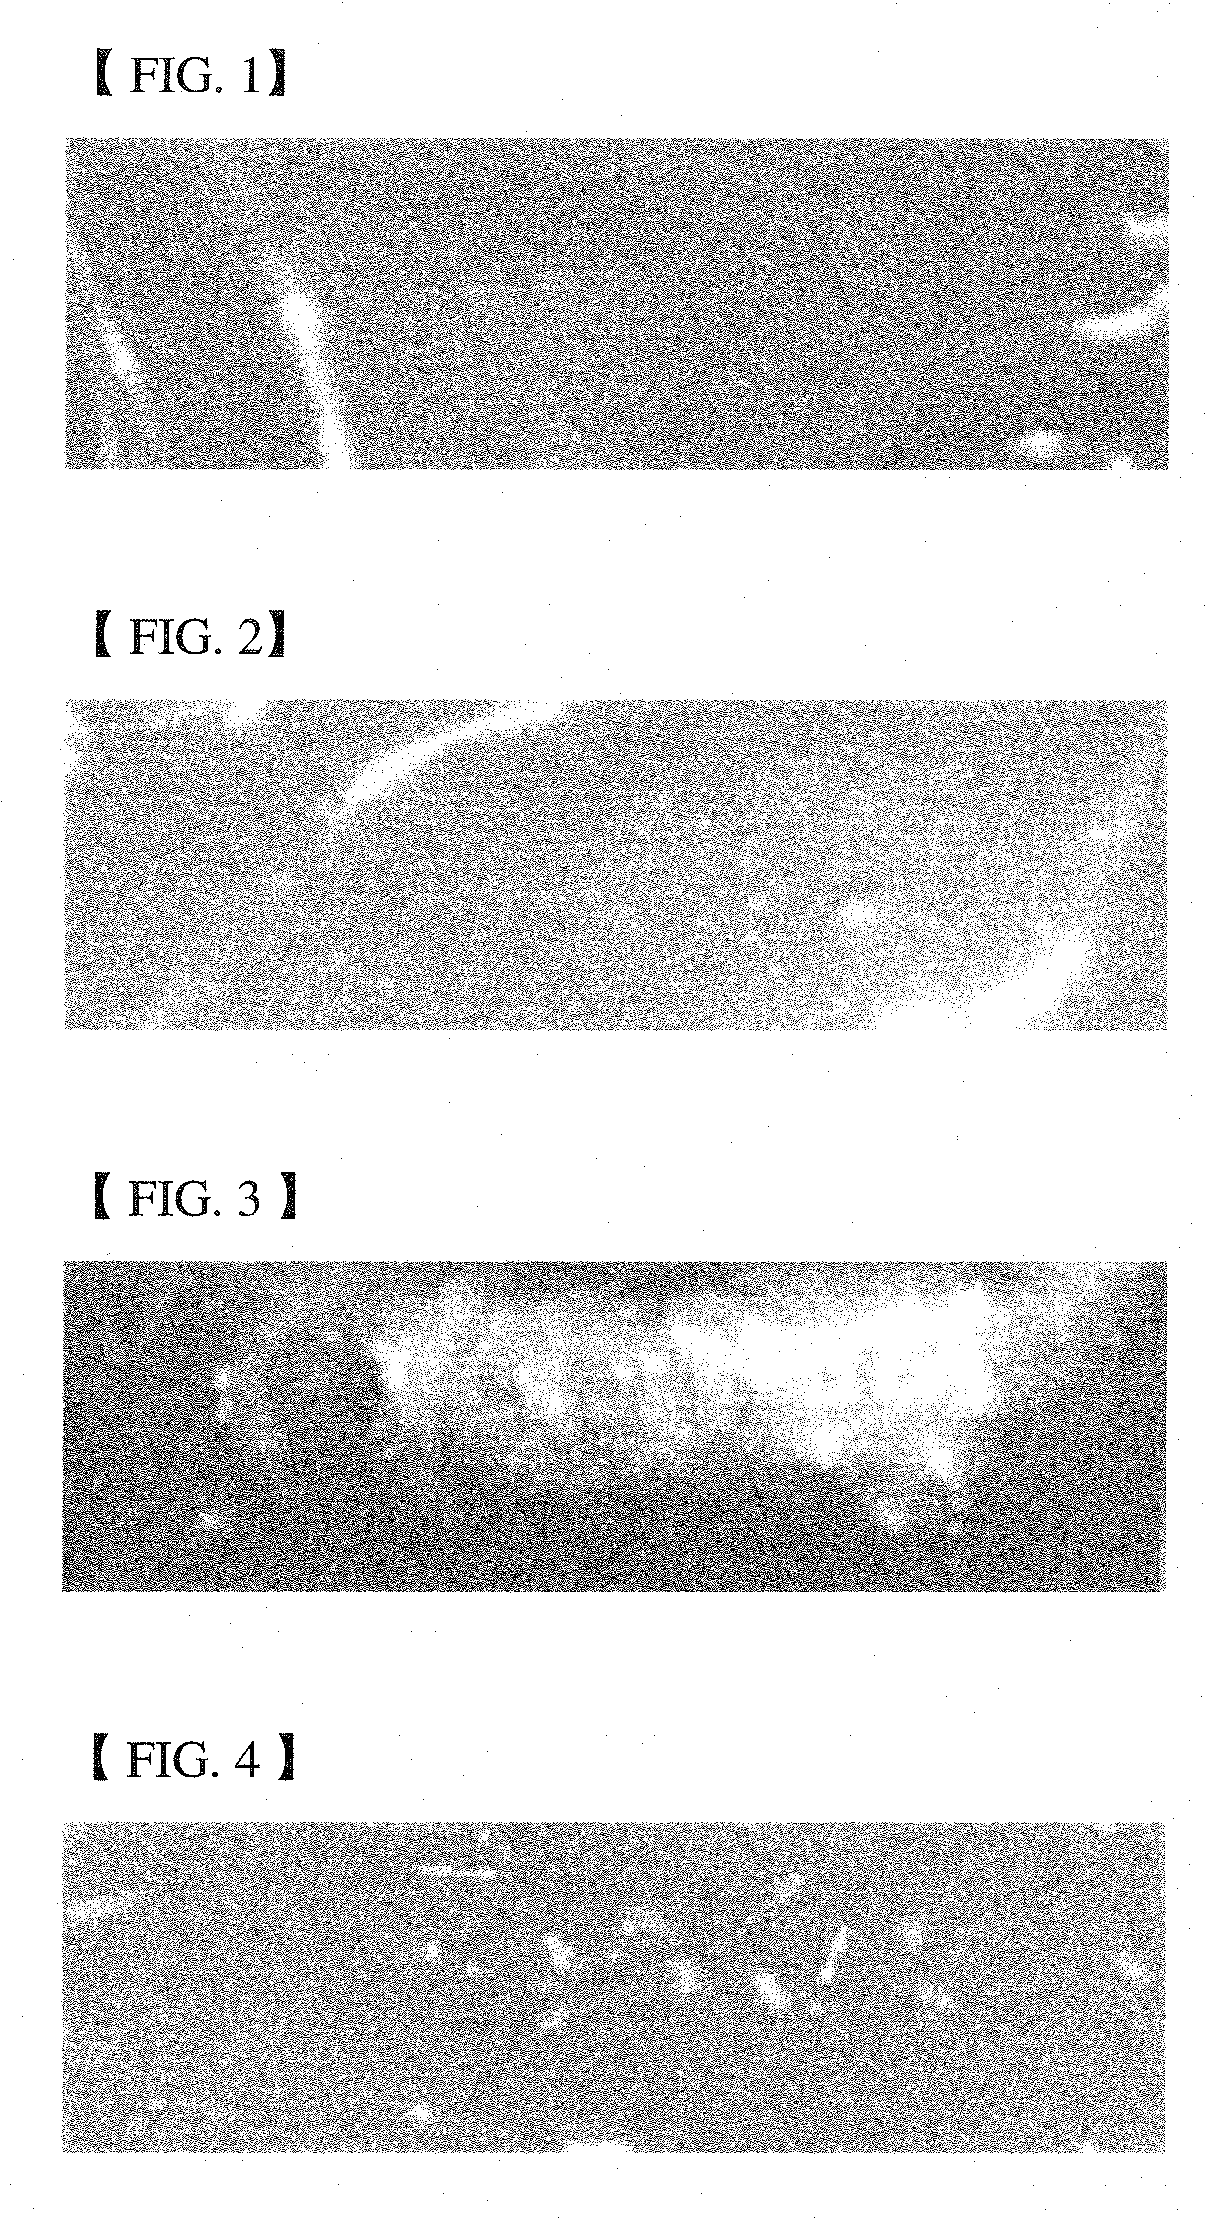 Formulation of antimicrobial film, coatings and/or sprays containing portulaca oleracea extract and film prepared therefrom